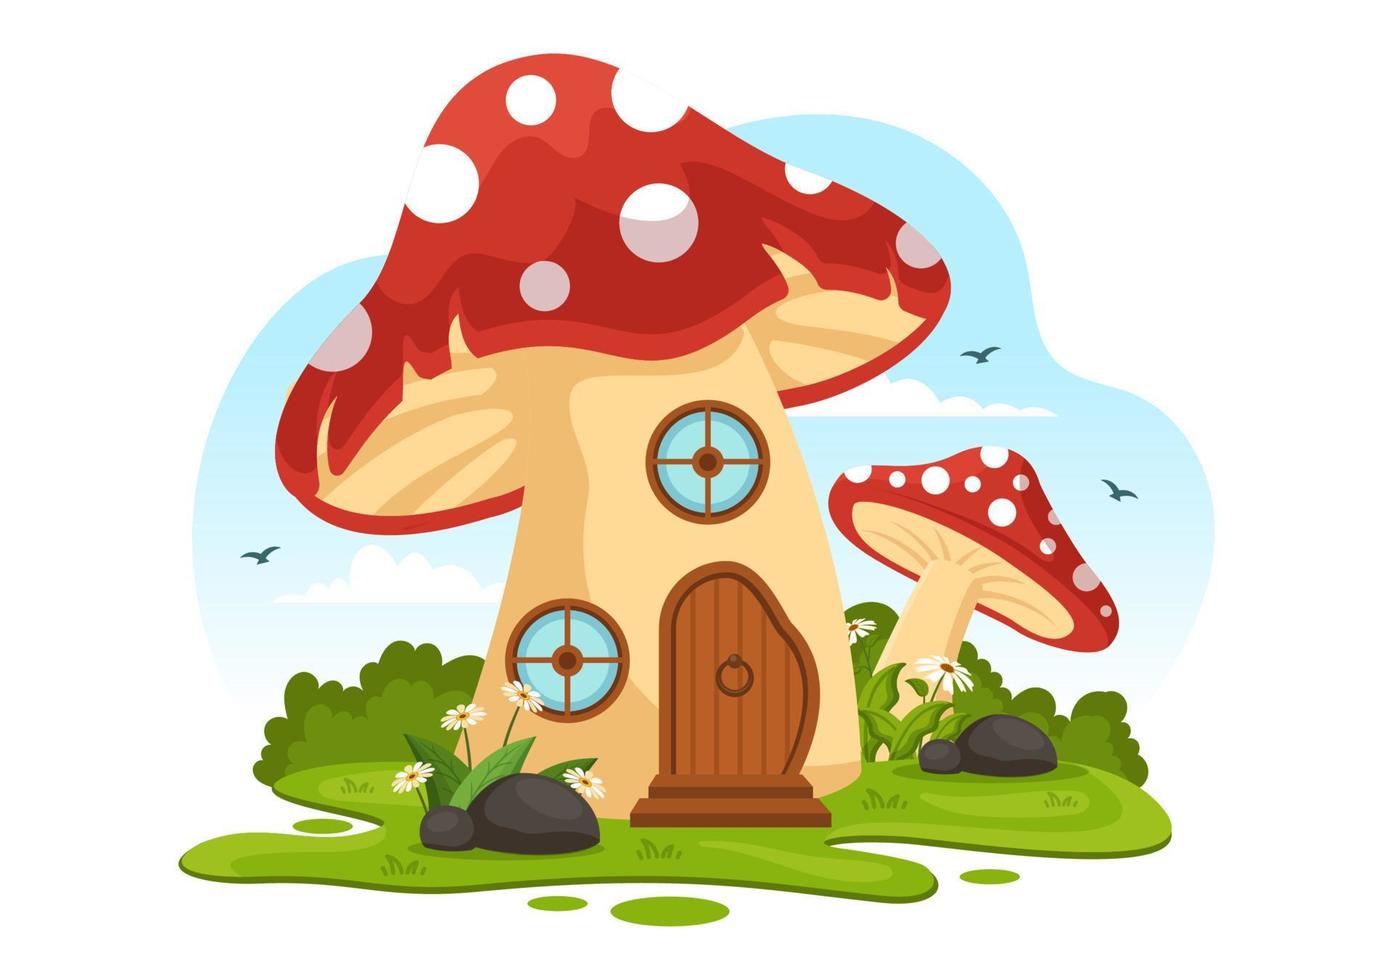 Mushrooms Illustration with Different Mushroom, Grass and Insects for Web Banner or Landing Page in Flat Cartoon Hand Drawn Templates vector